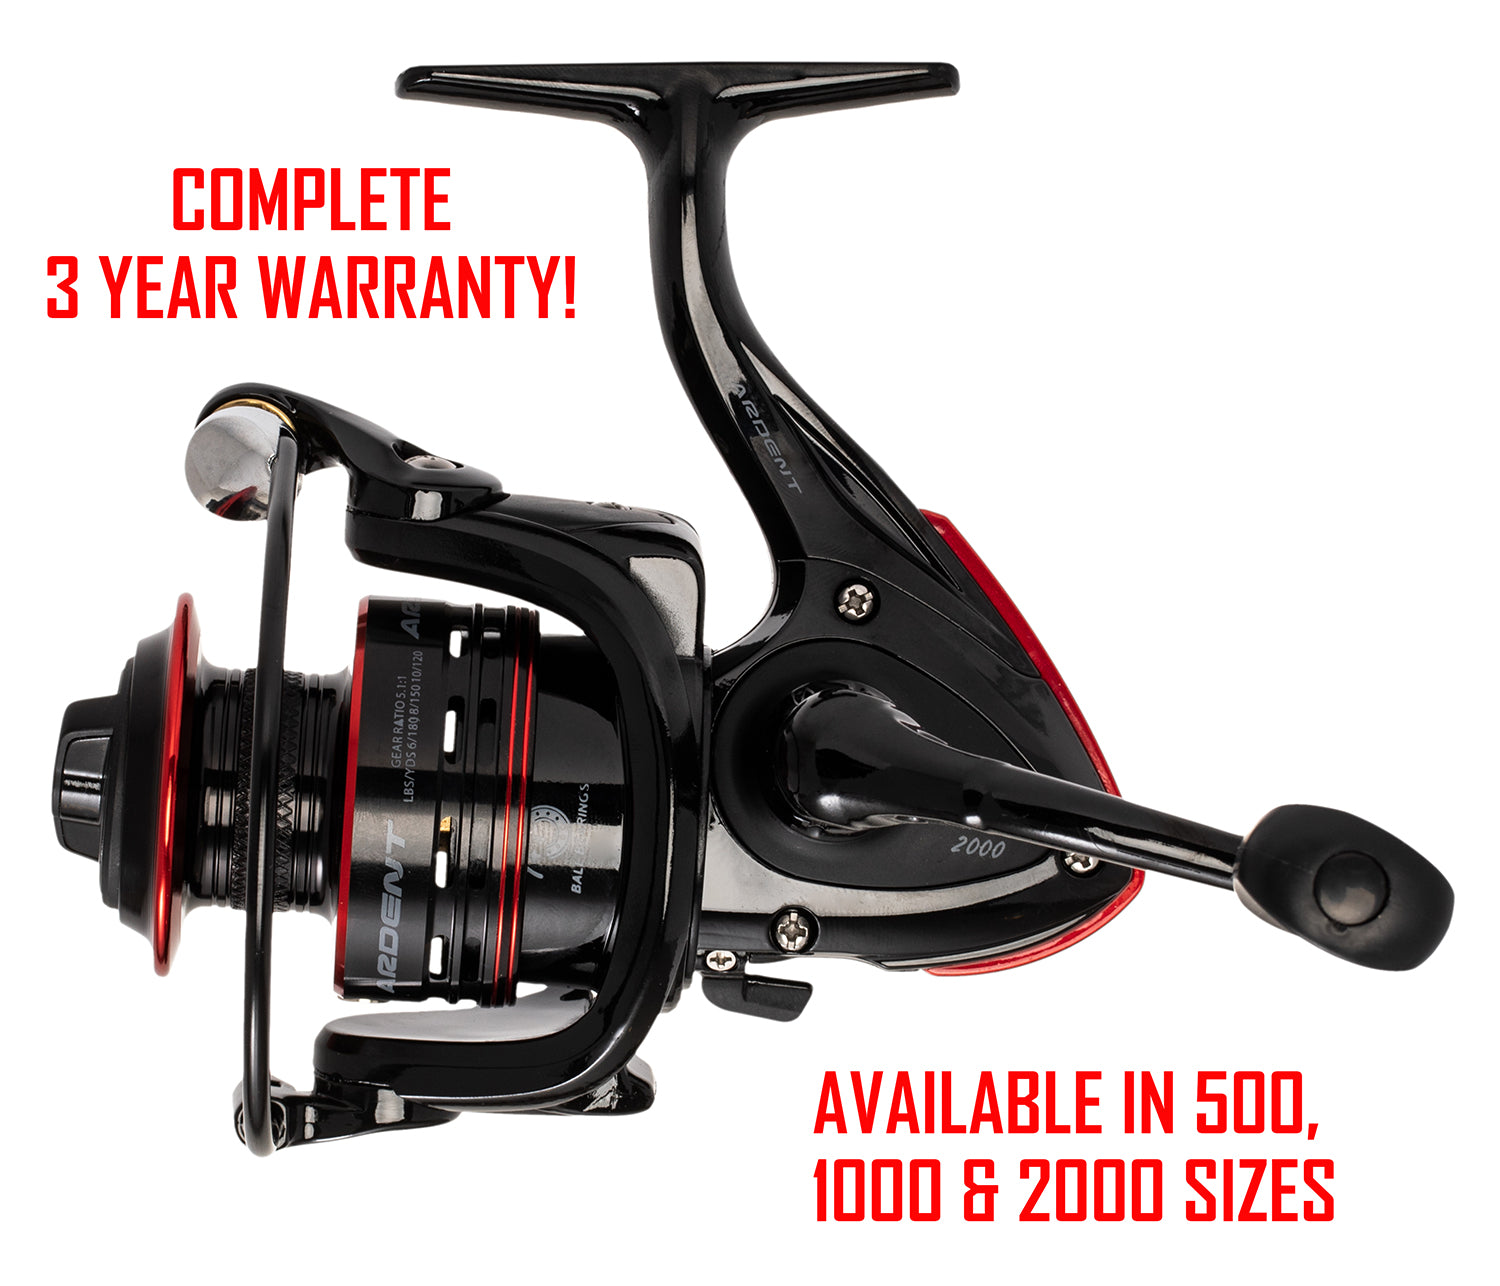 a black and red fishing reel (FINESSE SPINNING REEL). RED text in image: COMPLETE 3 YEAR WARRANTY! AVAILABLE IN 500, 1000 & 2000 SIZES